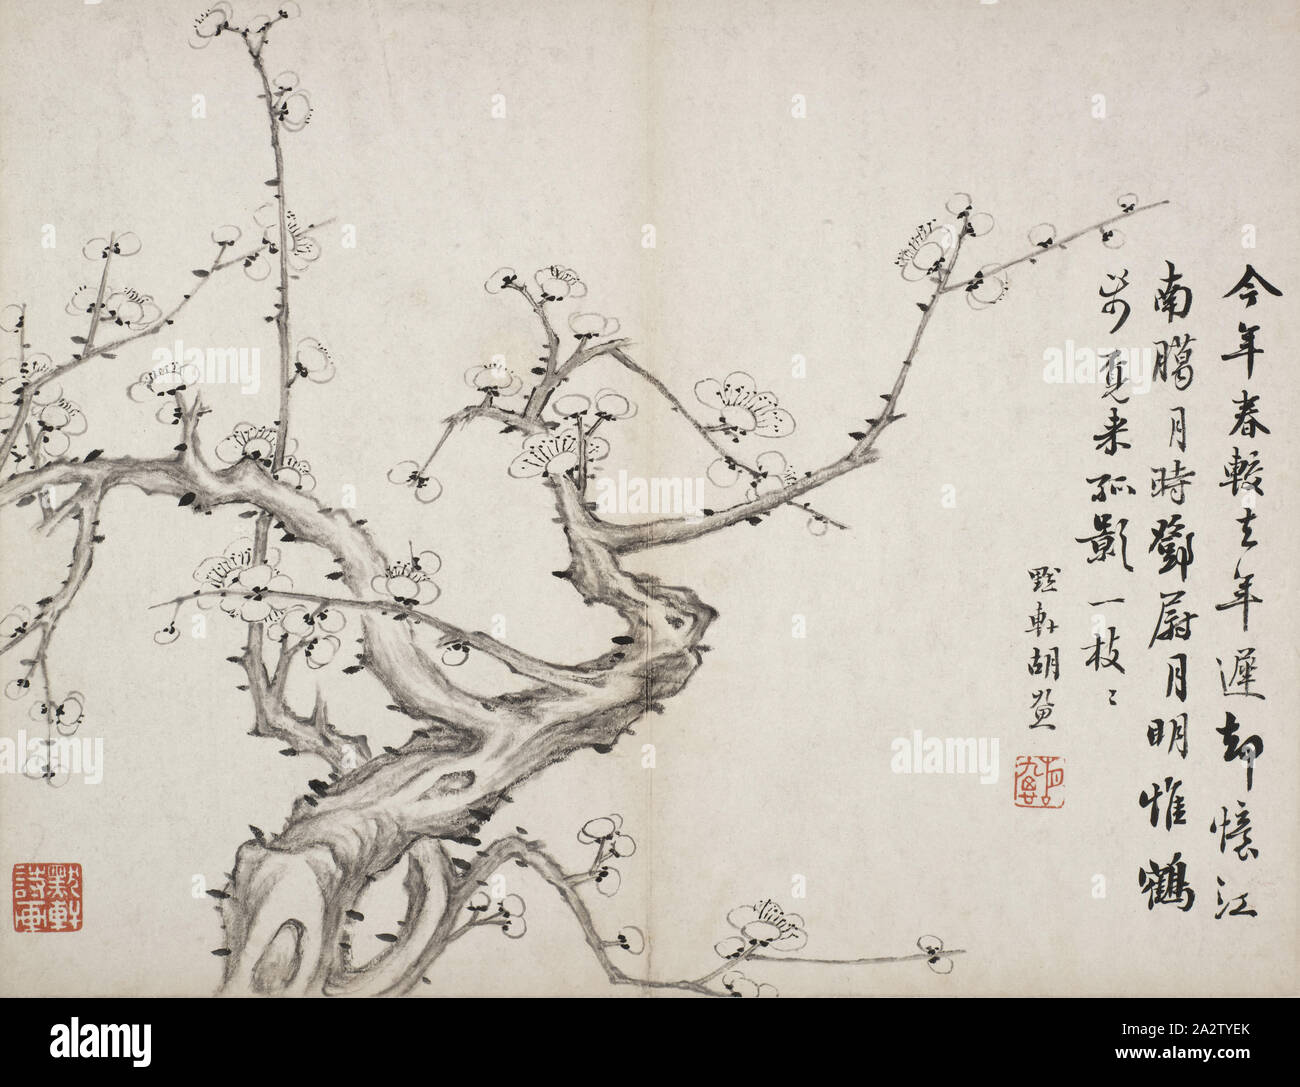 Chinese Poetry Stock Photos & Chinese Poetry Stock Images - Page 2 ...